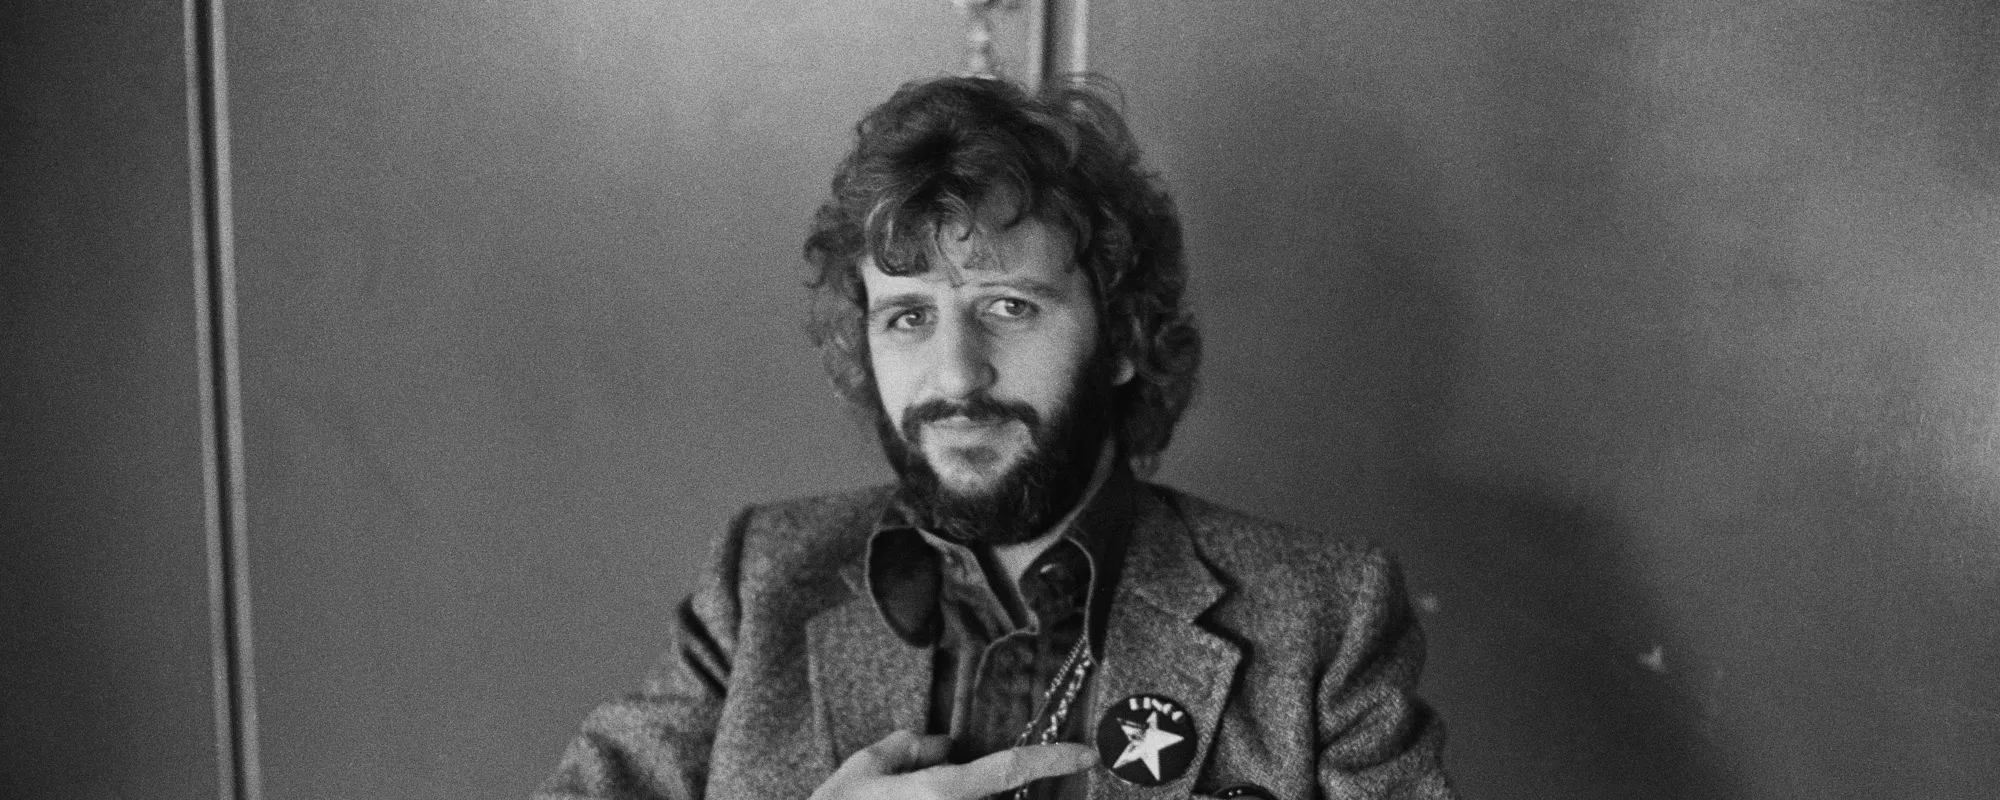 The Meaning Behind the First Song Ringo Starr Wrote for The Beatles: “Don’t Pass Me By”